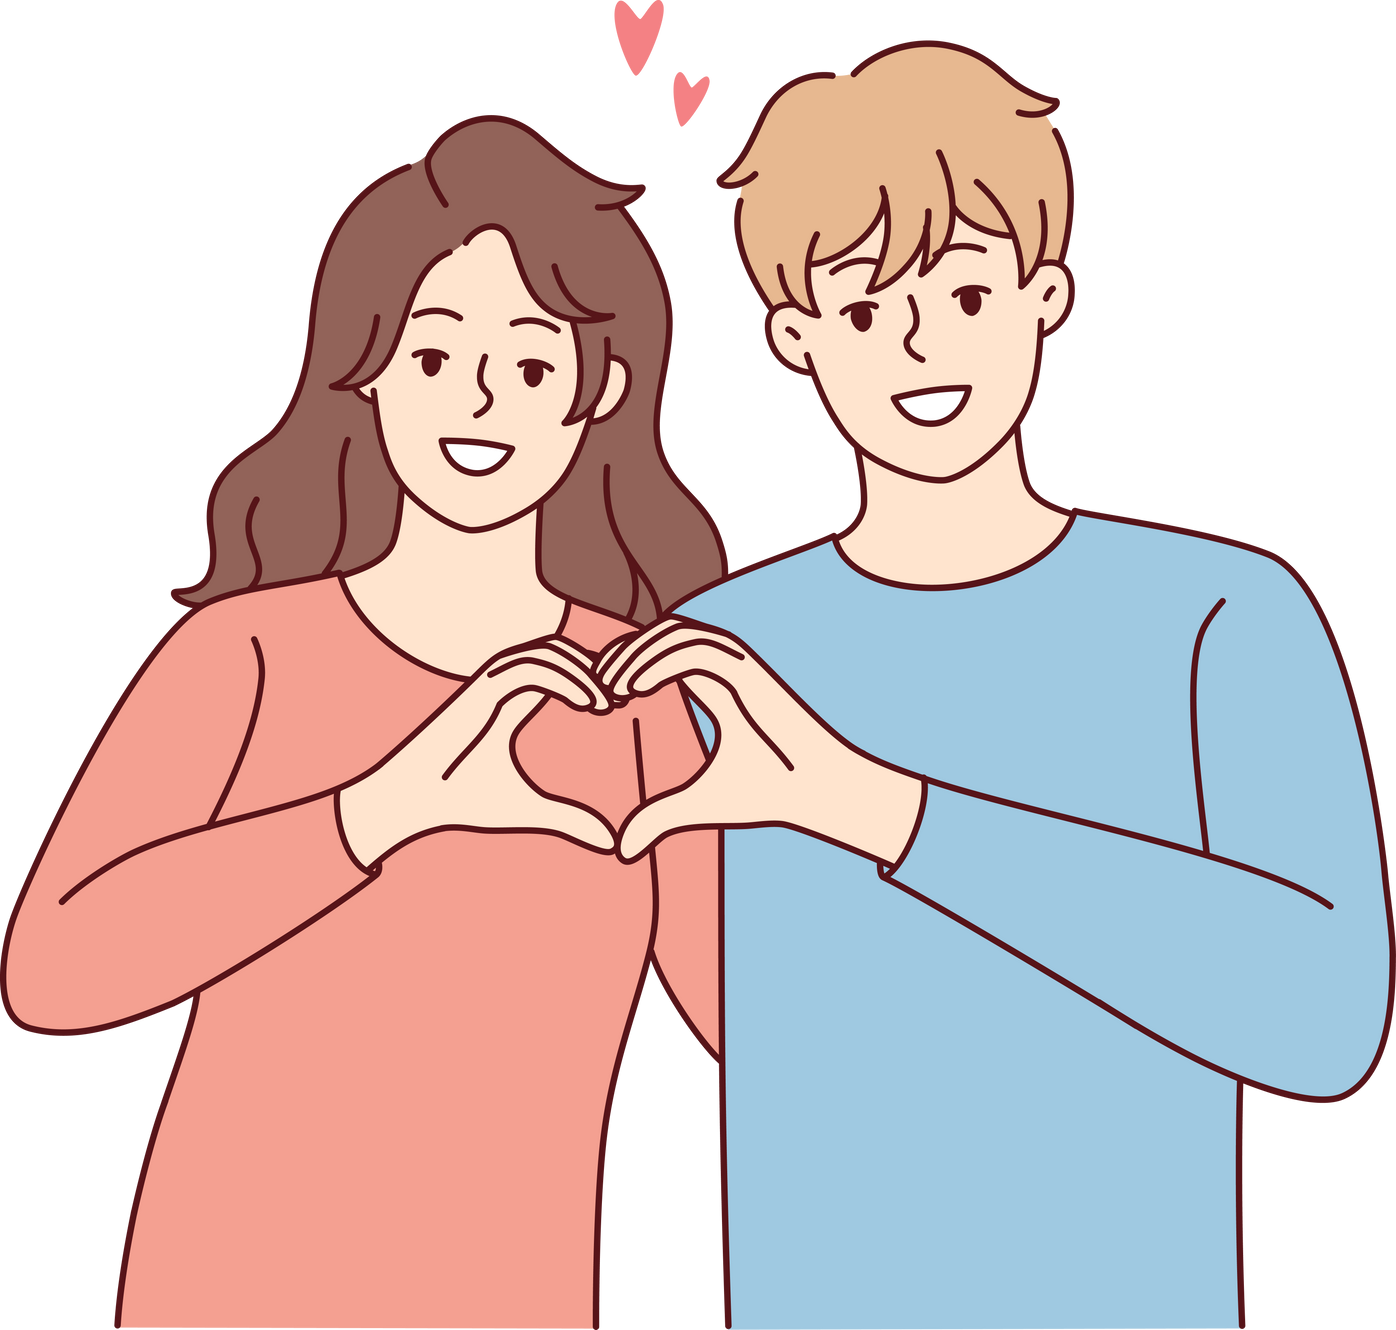 Smiling couple show heart hand gesture